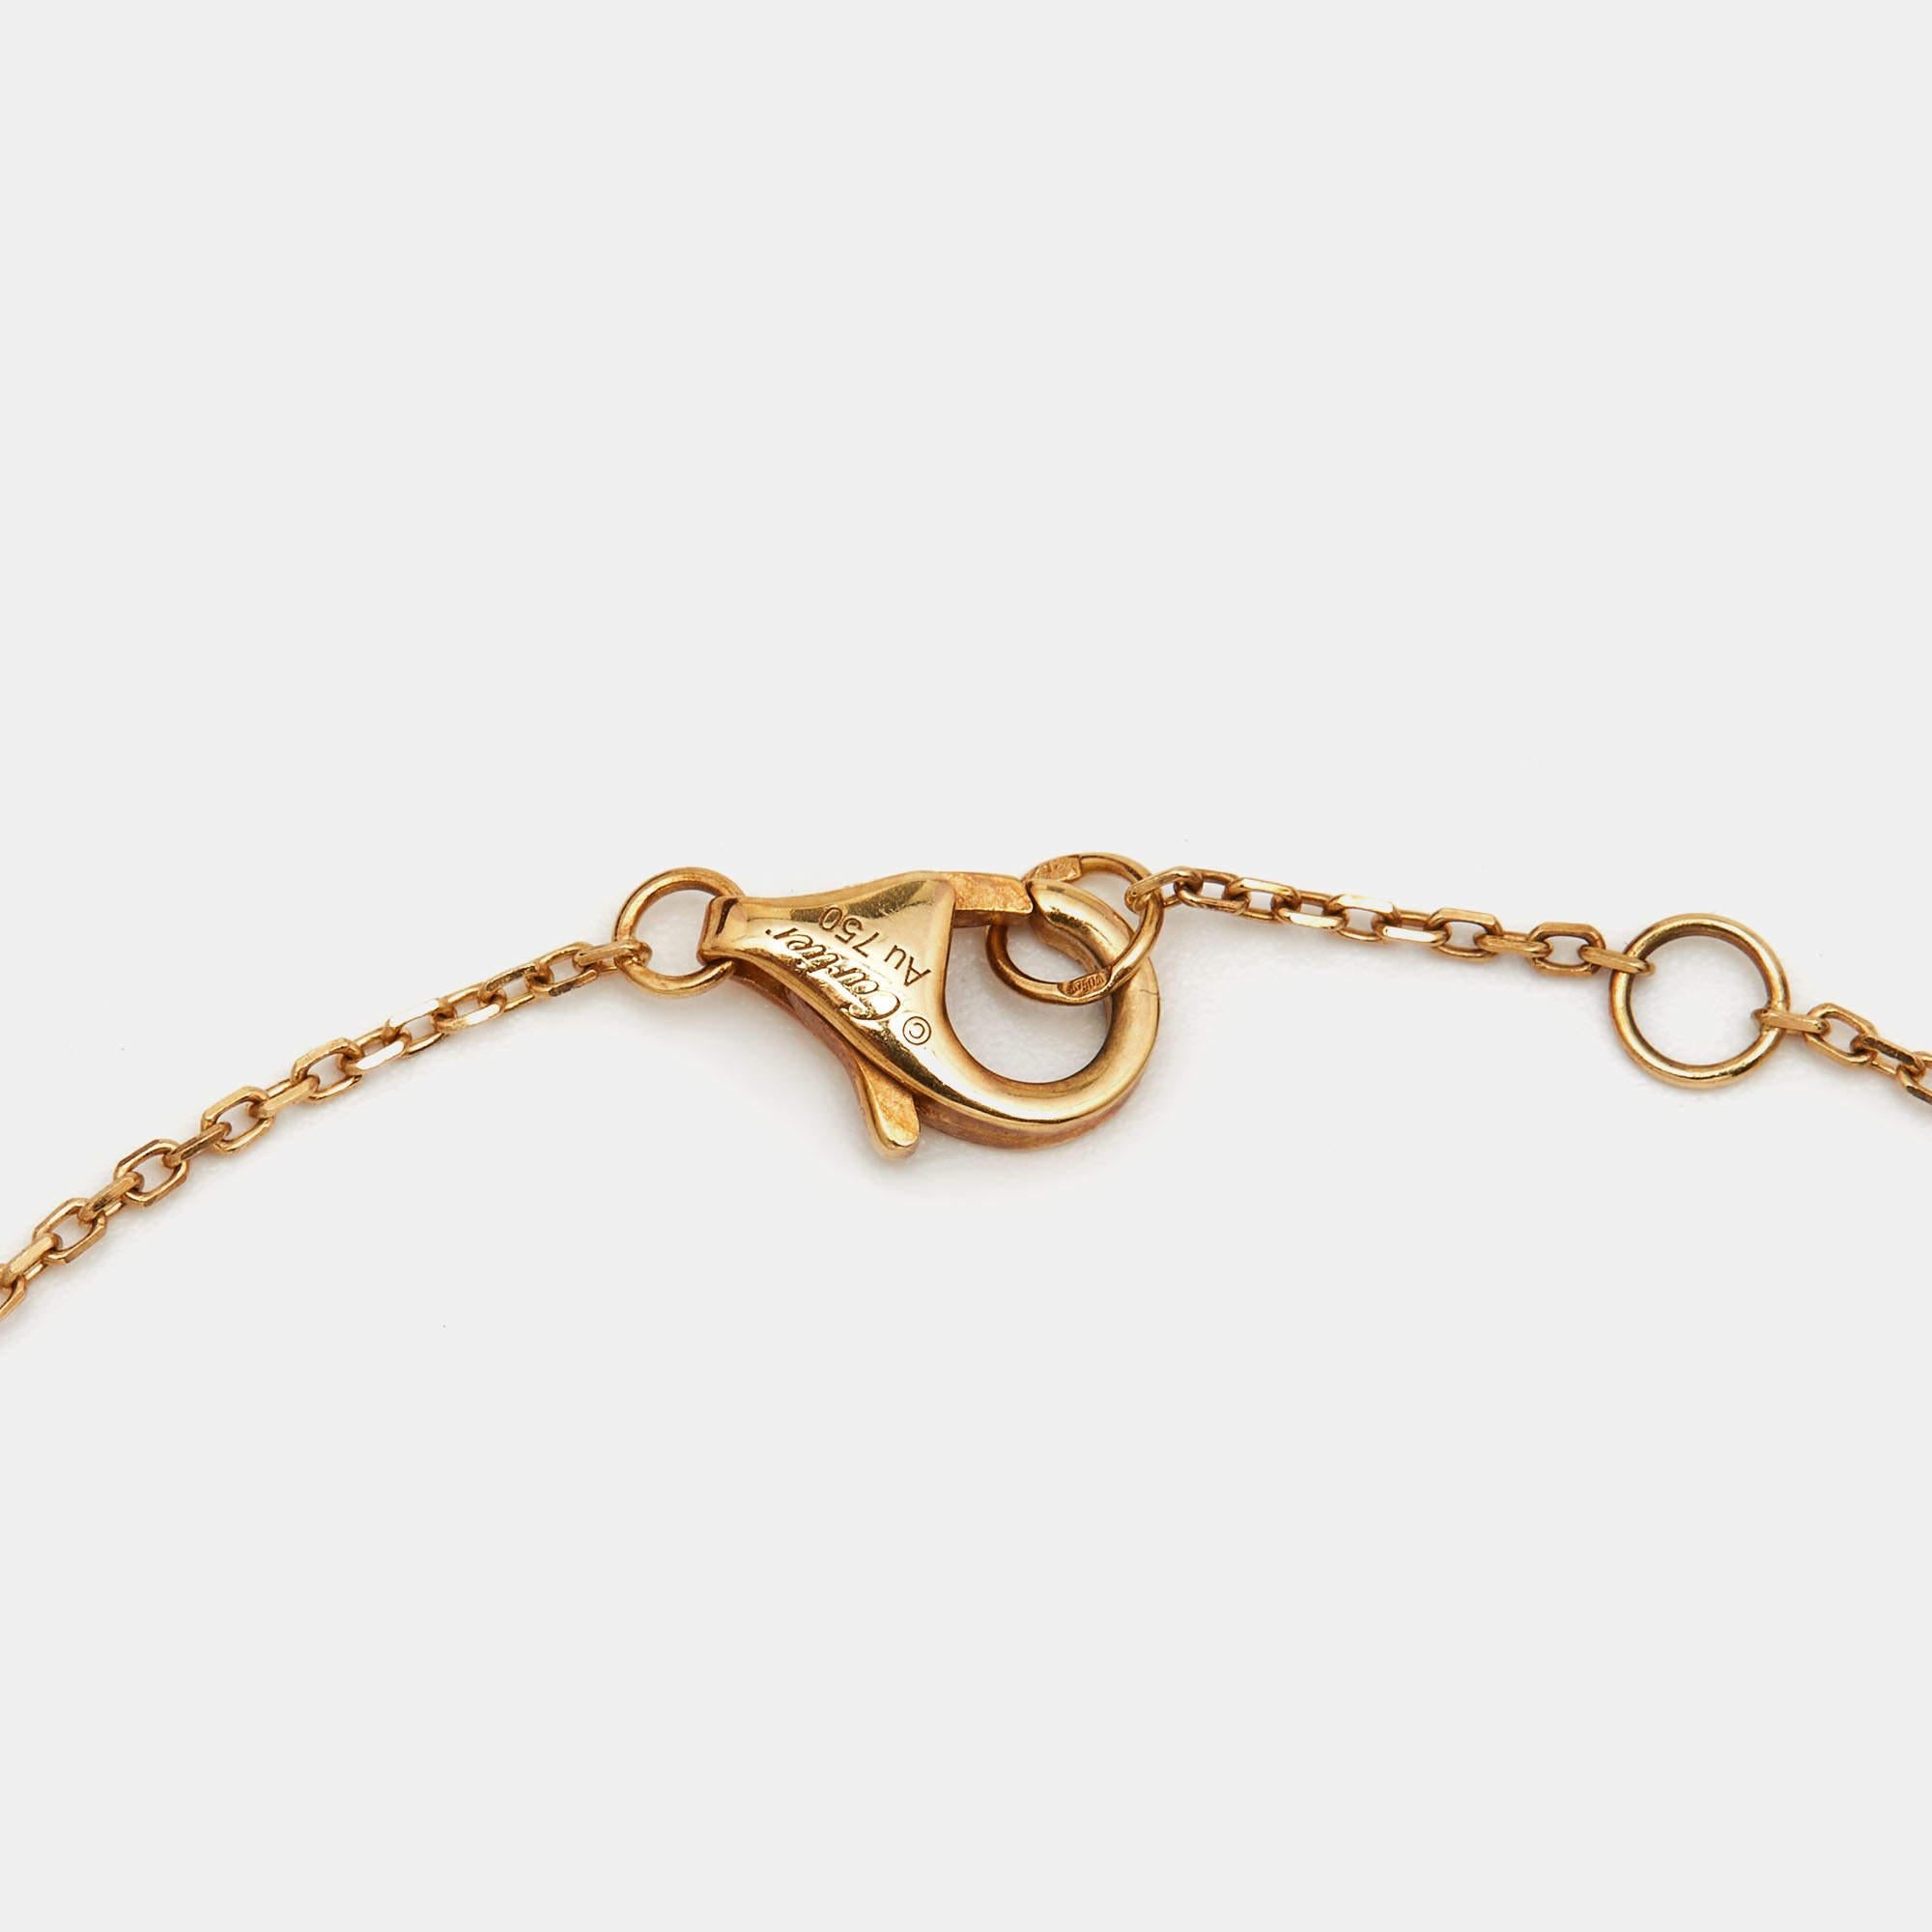 A magnificent offering from Cartier's Amulette de Cartier line. The bracelet comes sculpted from 18k yellow gold, and it has the signature motif in mother of pearl highlighted by a shimmering diamond. Smoothly finished, the desirable creation